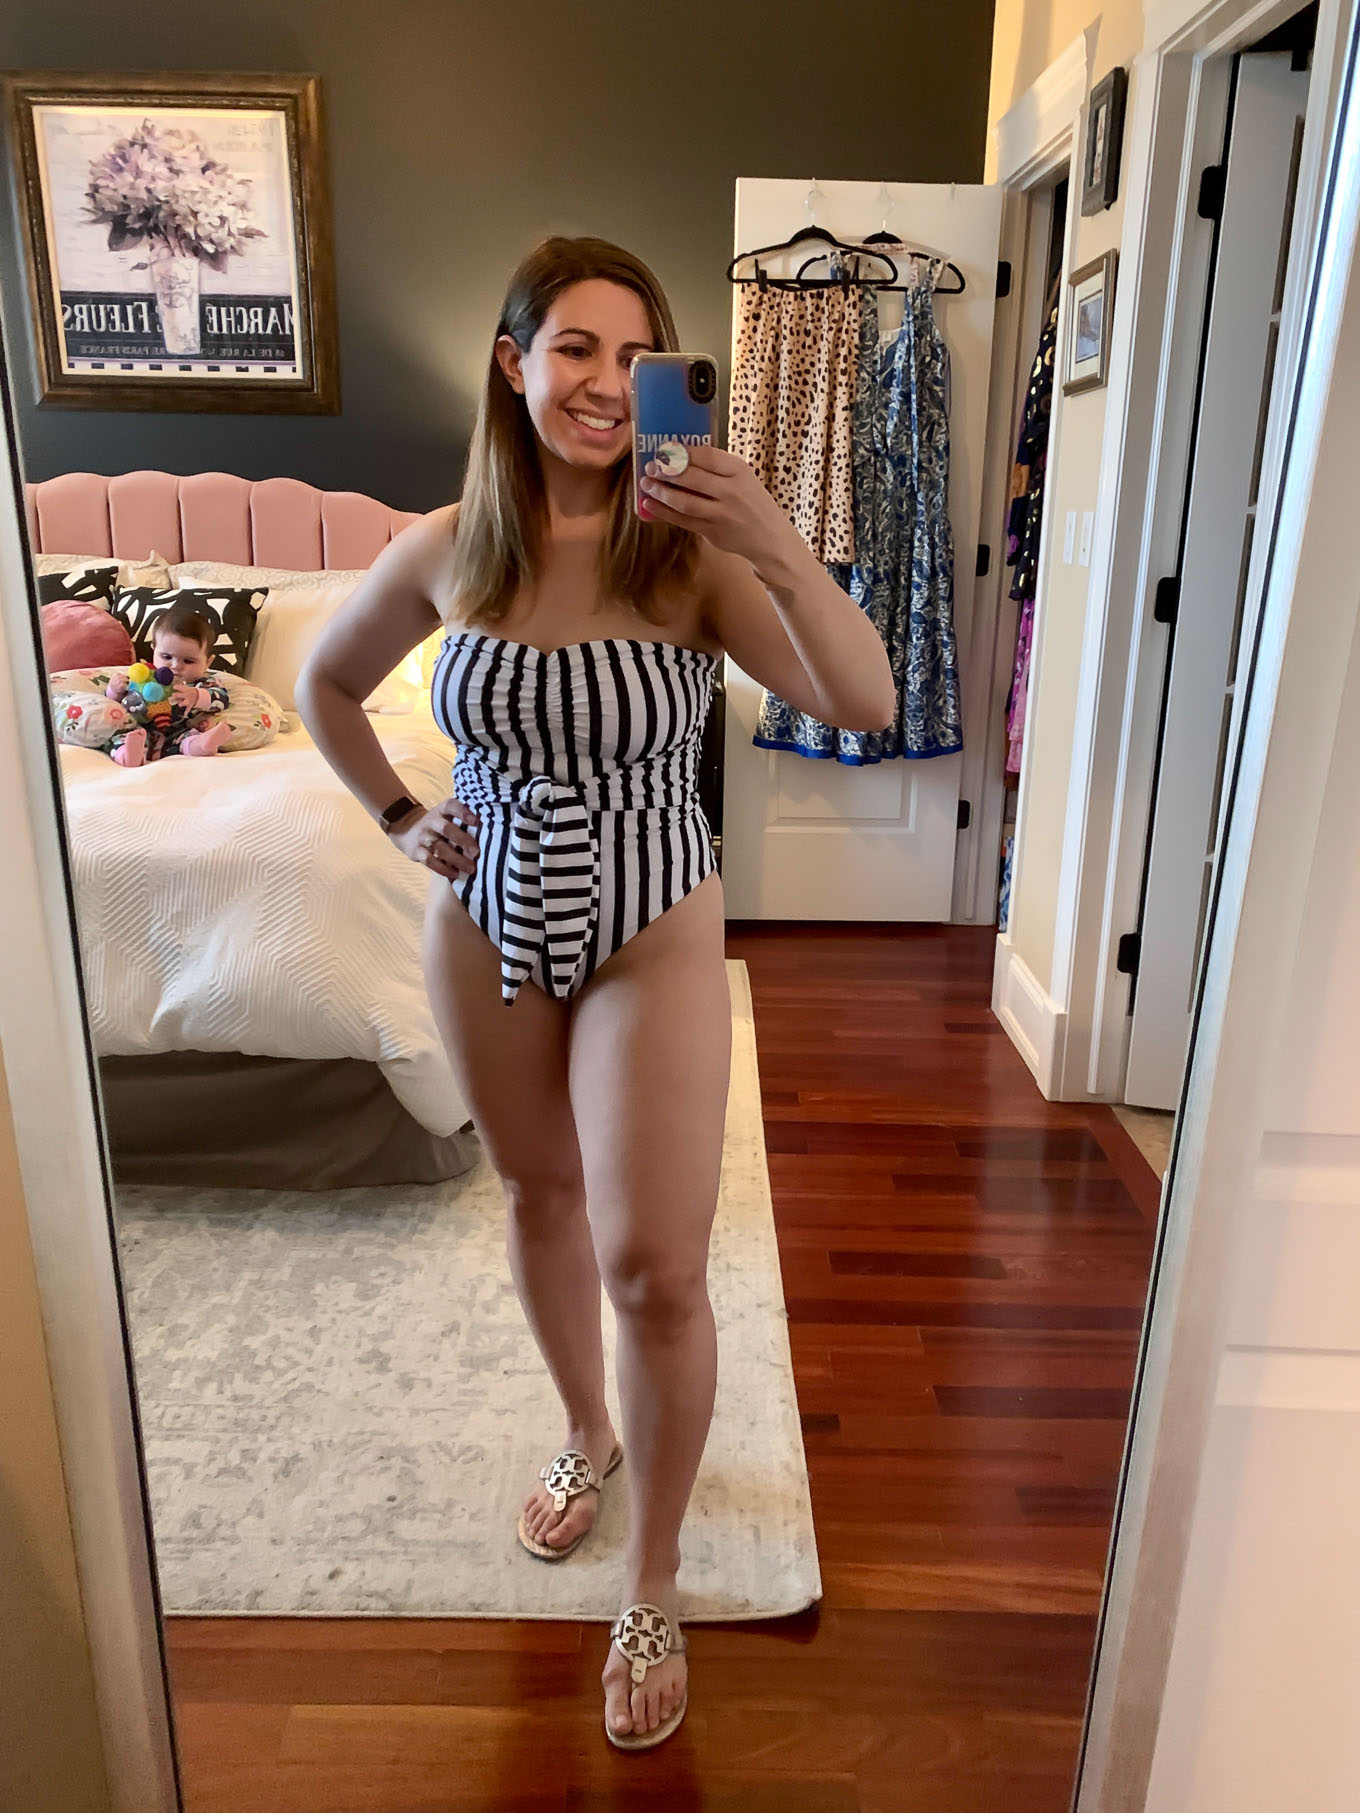 At Home Swimwear Try On by popular Chicago fashion blog, Glass of Glam: image of a woman standing in her master bedroom and wearing a SheIn Striped Knot Waist Bandeau One Piece Swimsuit.